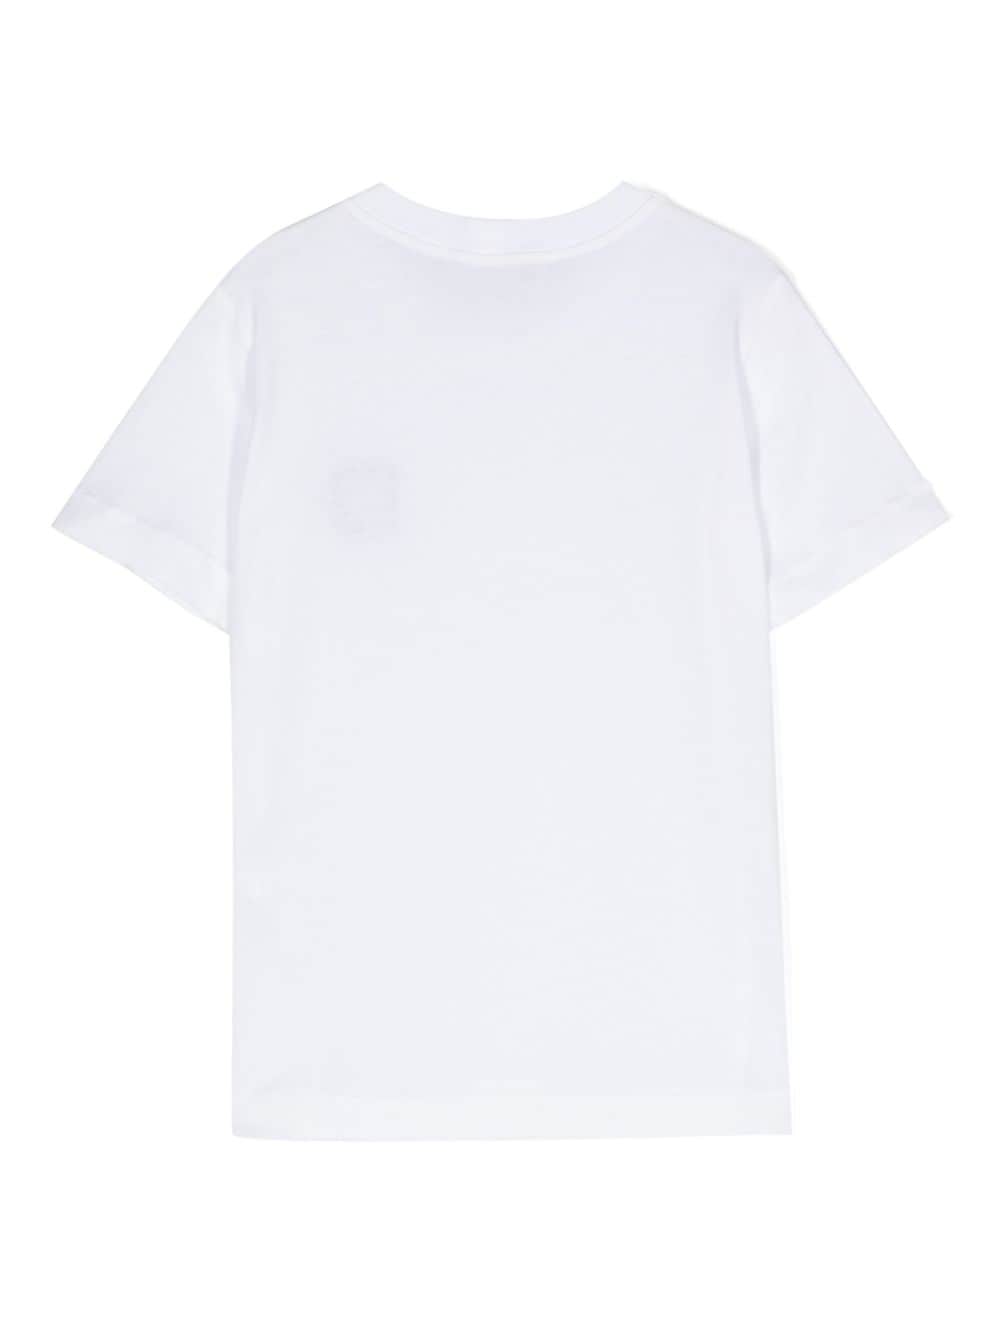 Cotton jersey T-shirt<BR/><BR/><BR/>